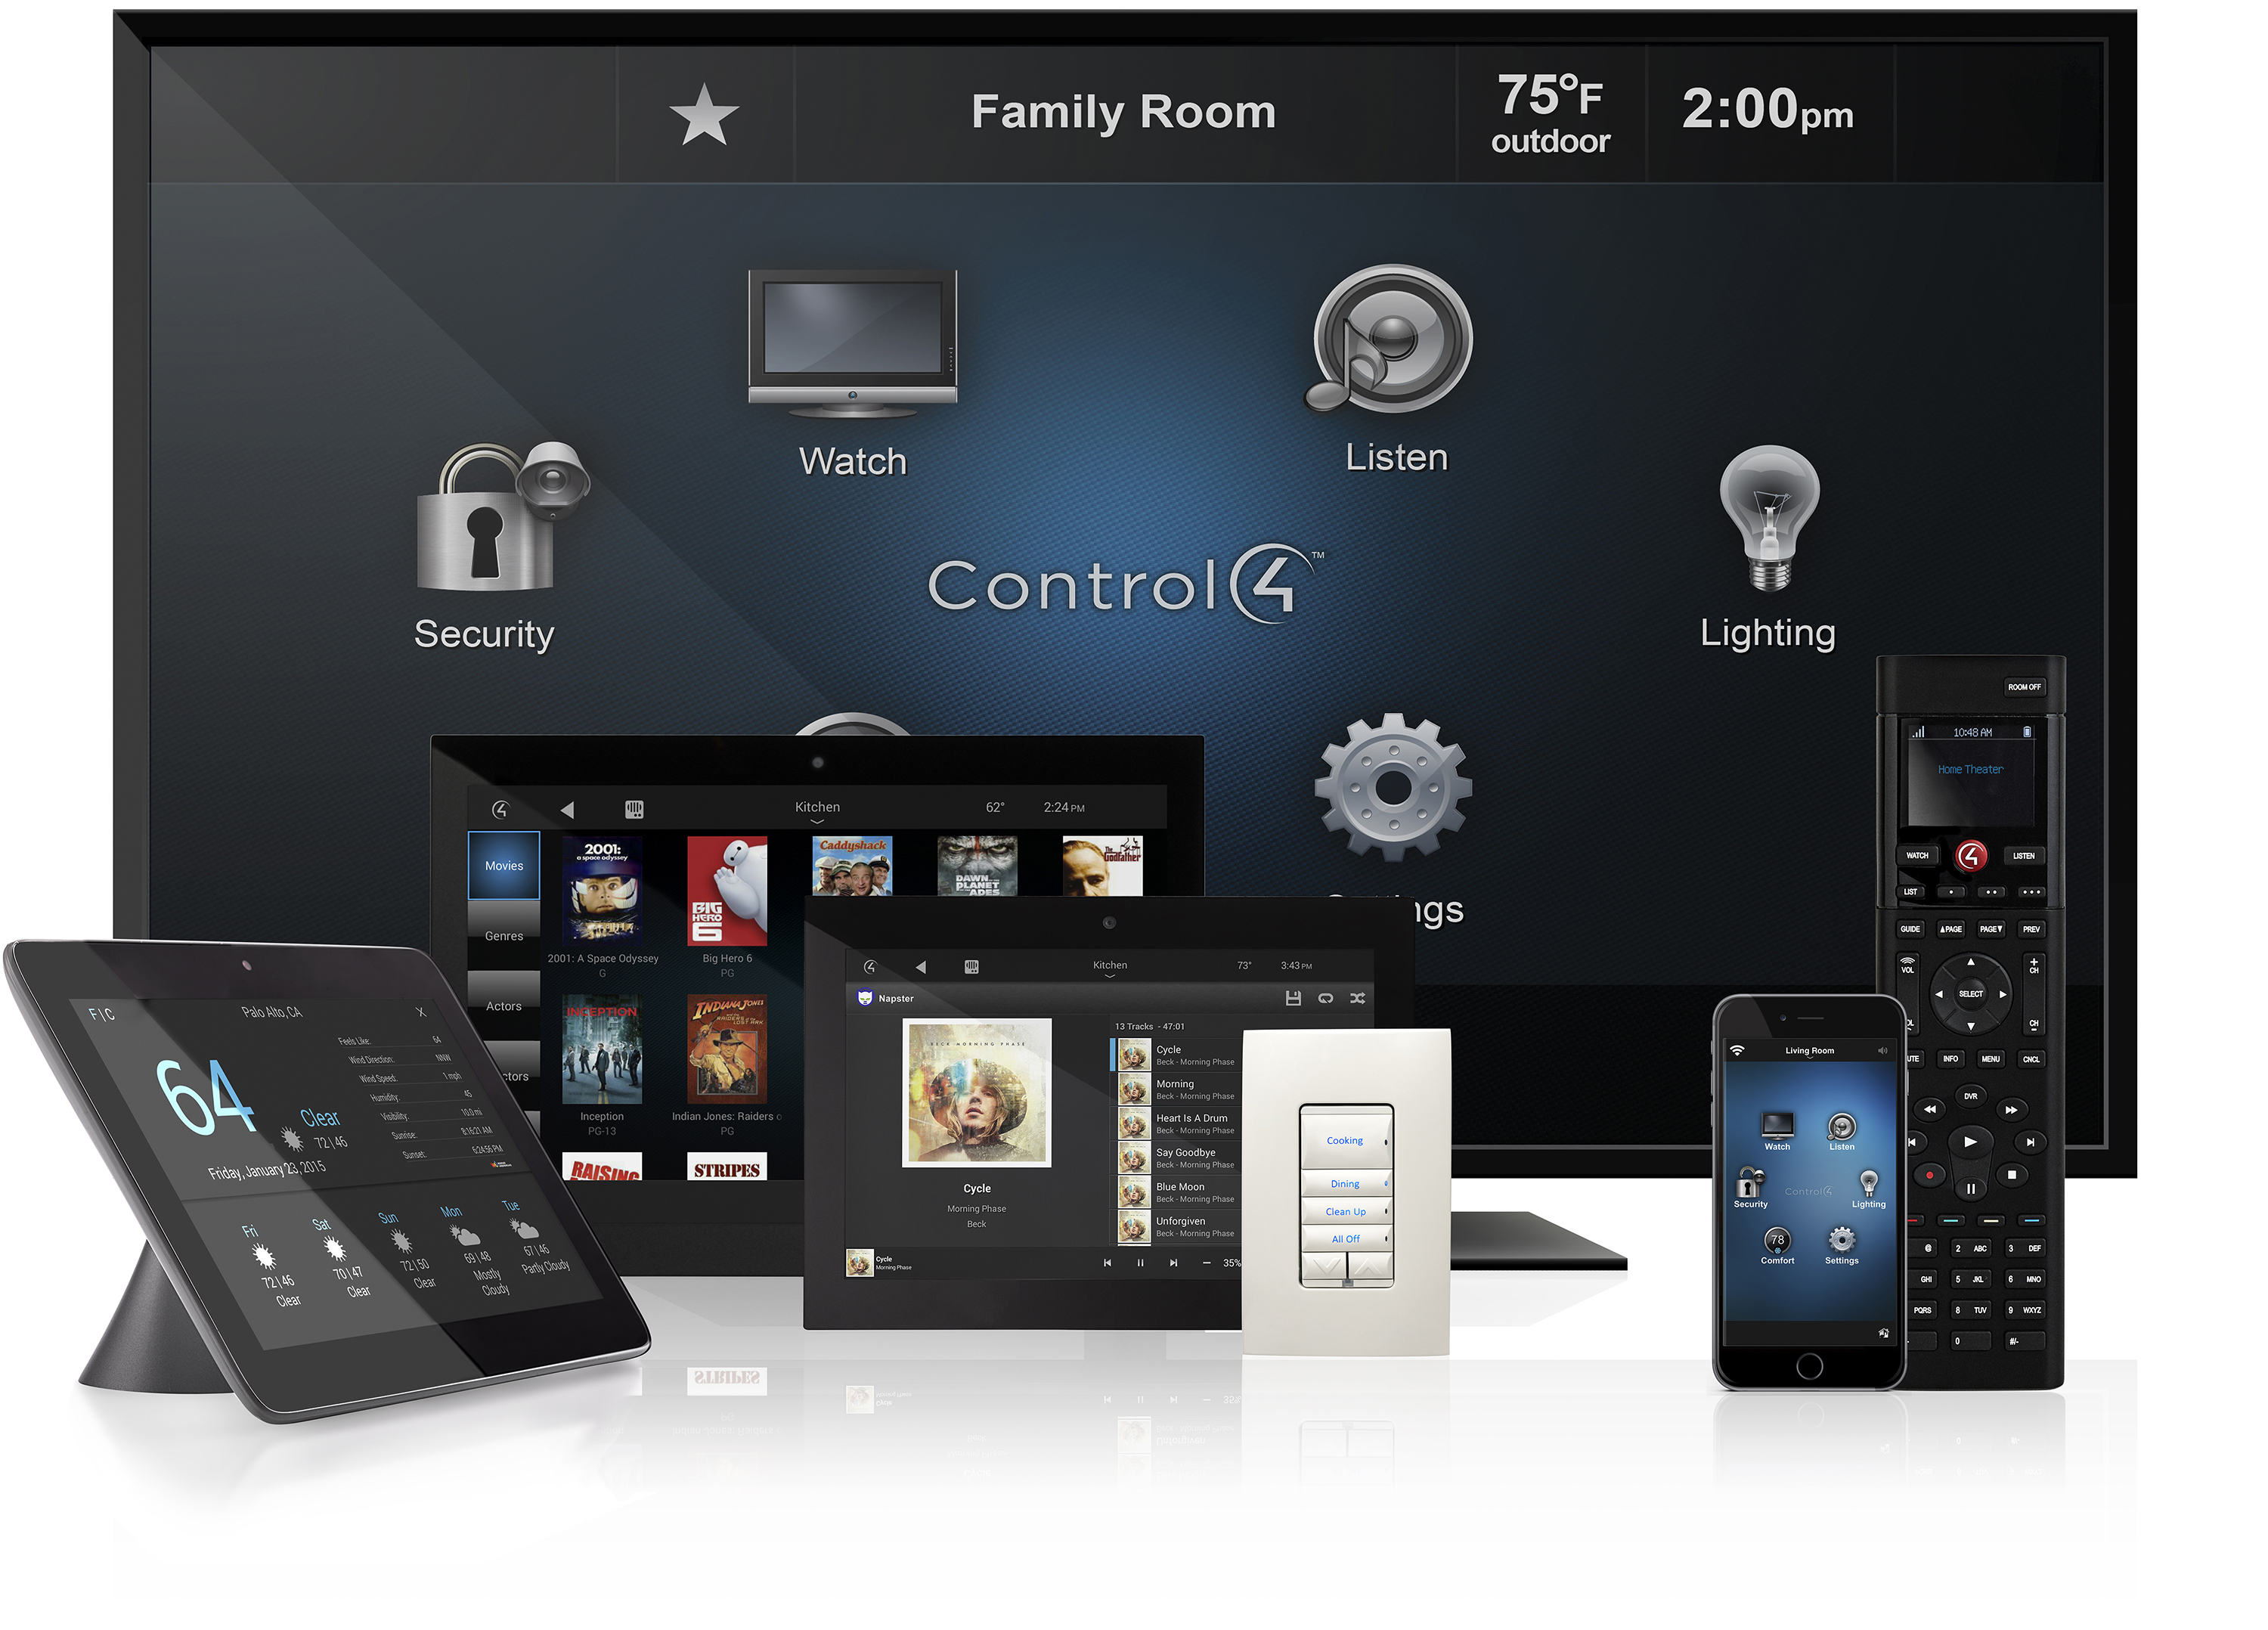 home control system